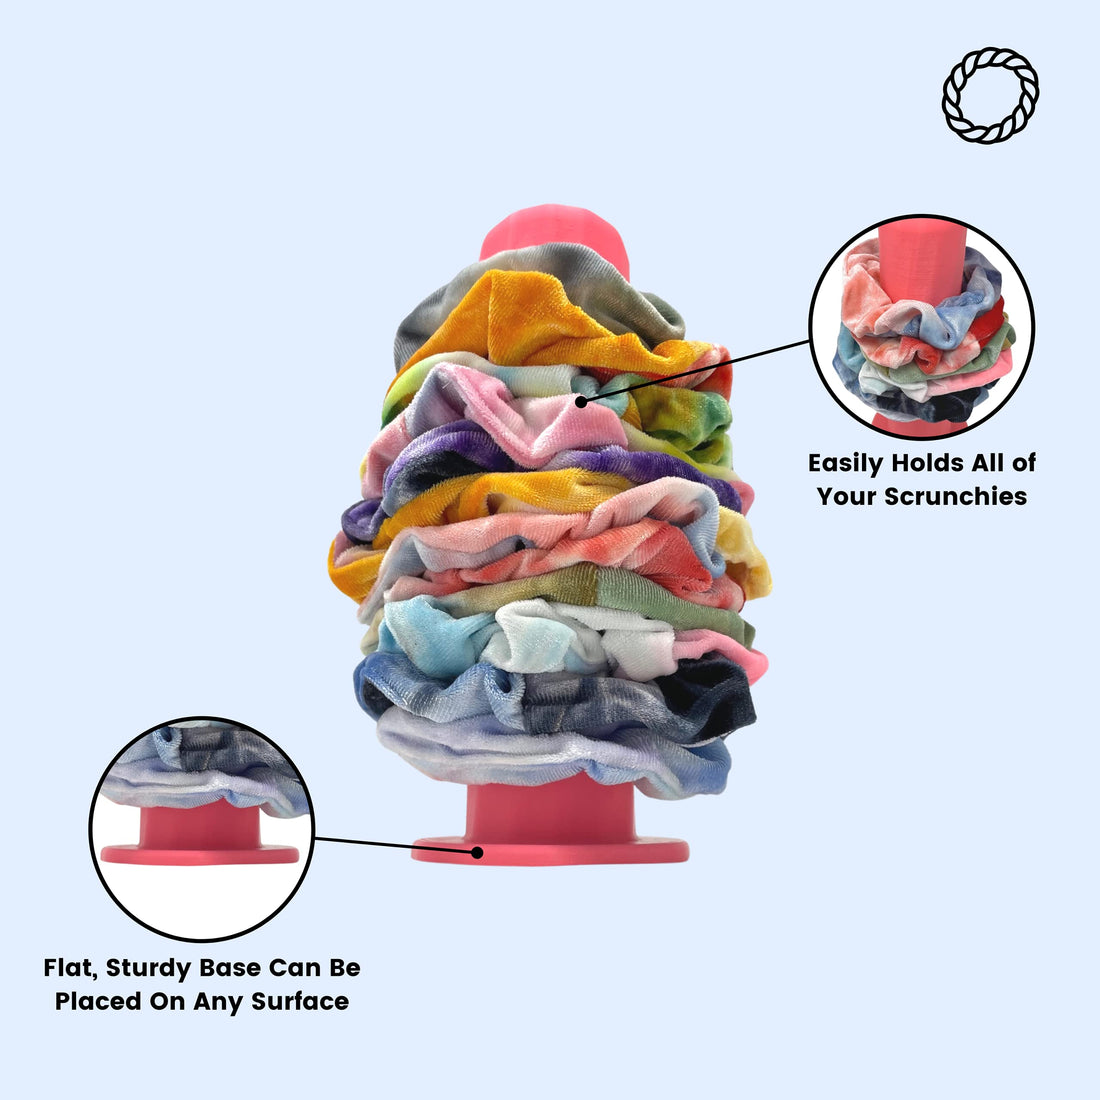 Scrunchie Tower Organizer - Perfect For Displaying & Organizing Scrunchies, Hair Ties, and Bracelets